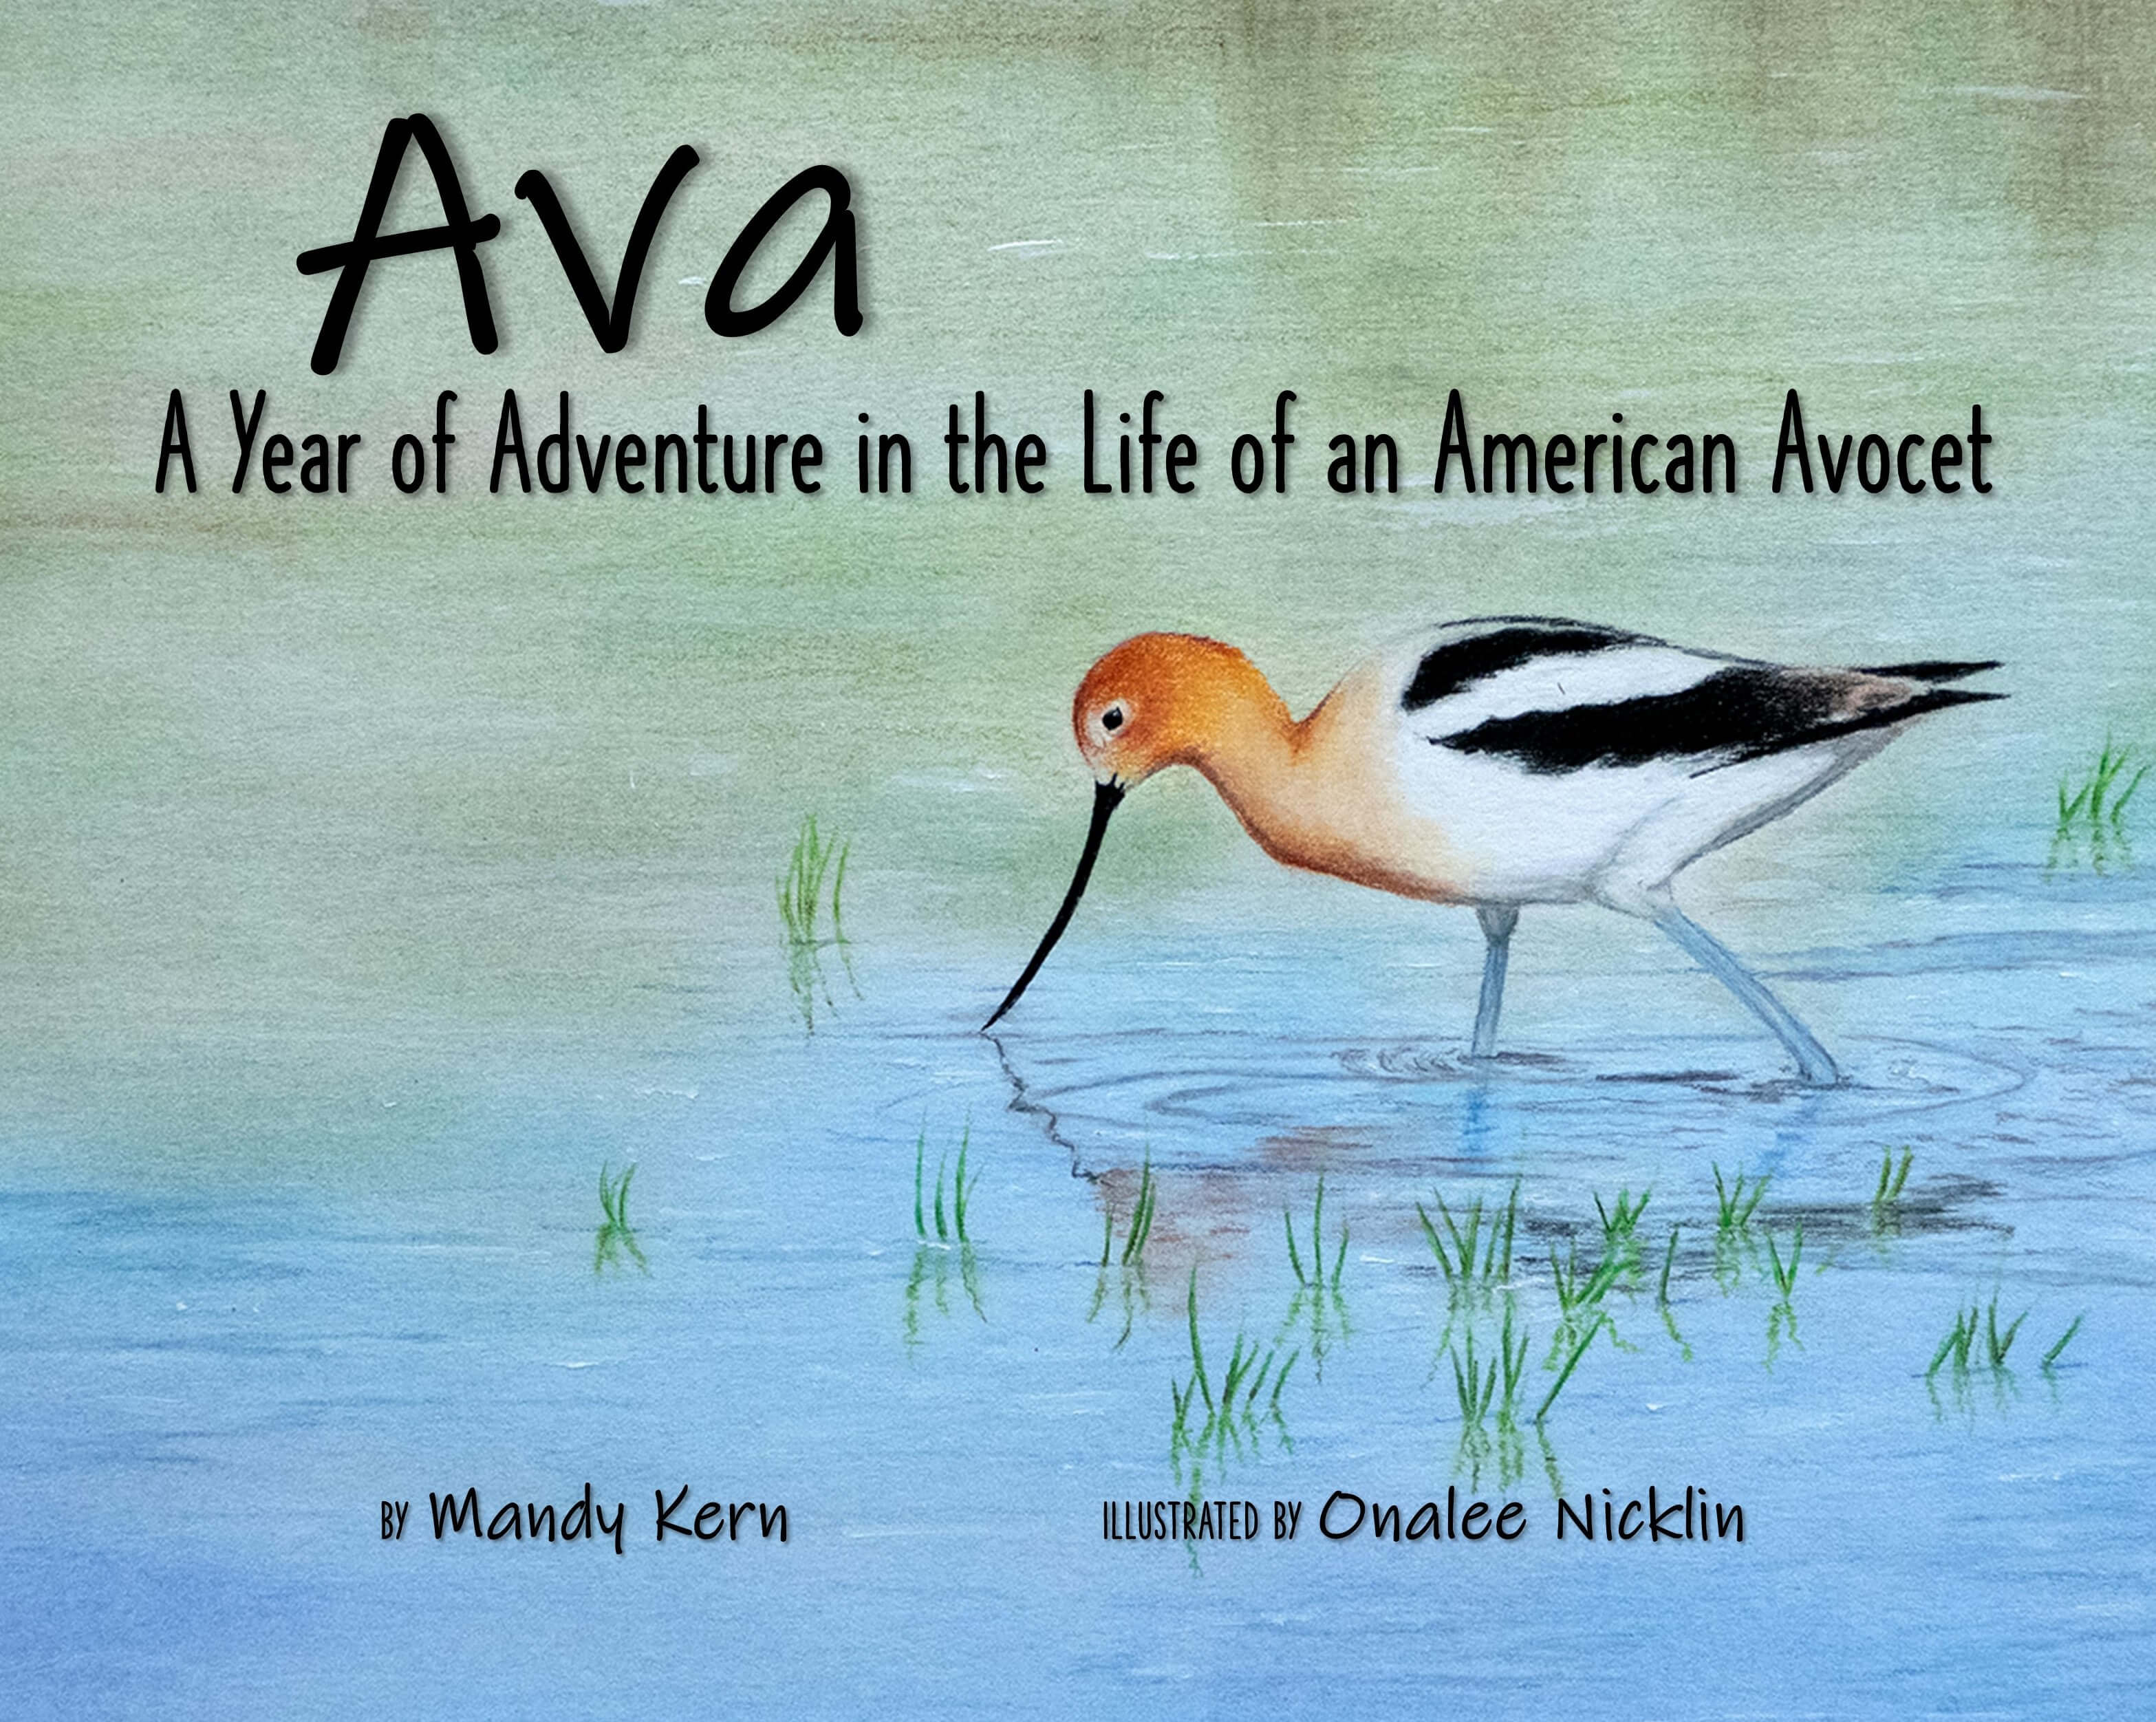 The Kansas Wetlands Education Center is debuting a 32-page fully illustrated children's book about an American Avocet, a species of shorebird. Cheyenne Bottoms and the importance of wetland habitats are featured throughout. Families can receive a free copy at the June book launch event.